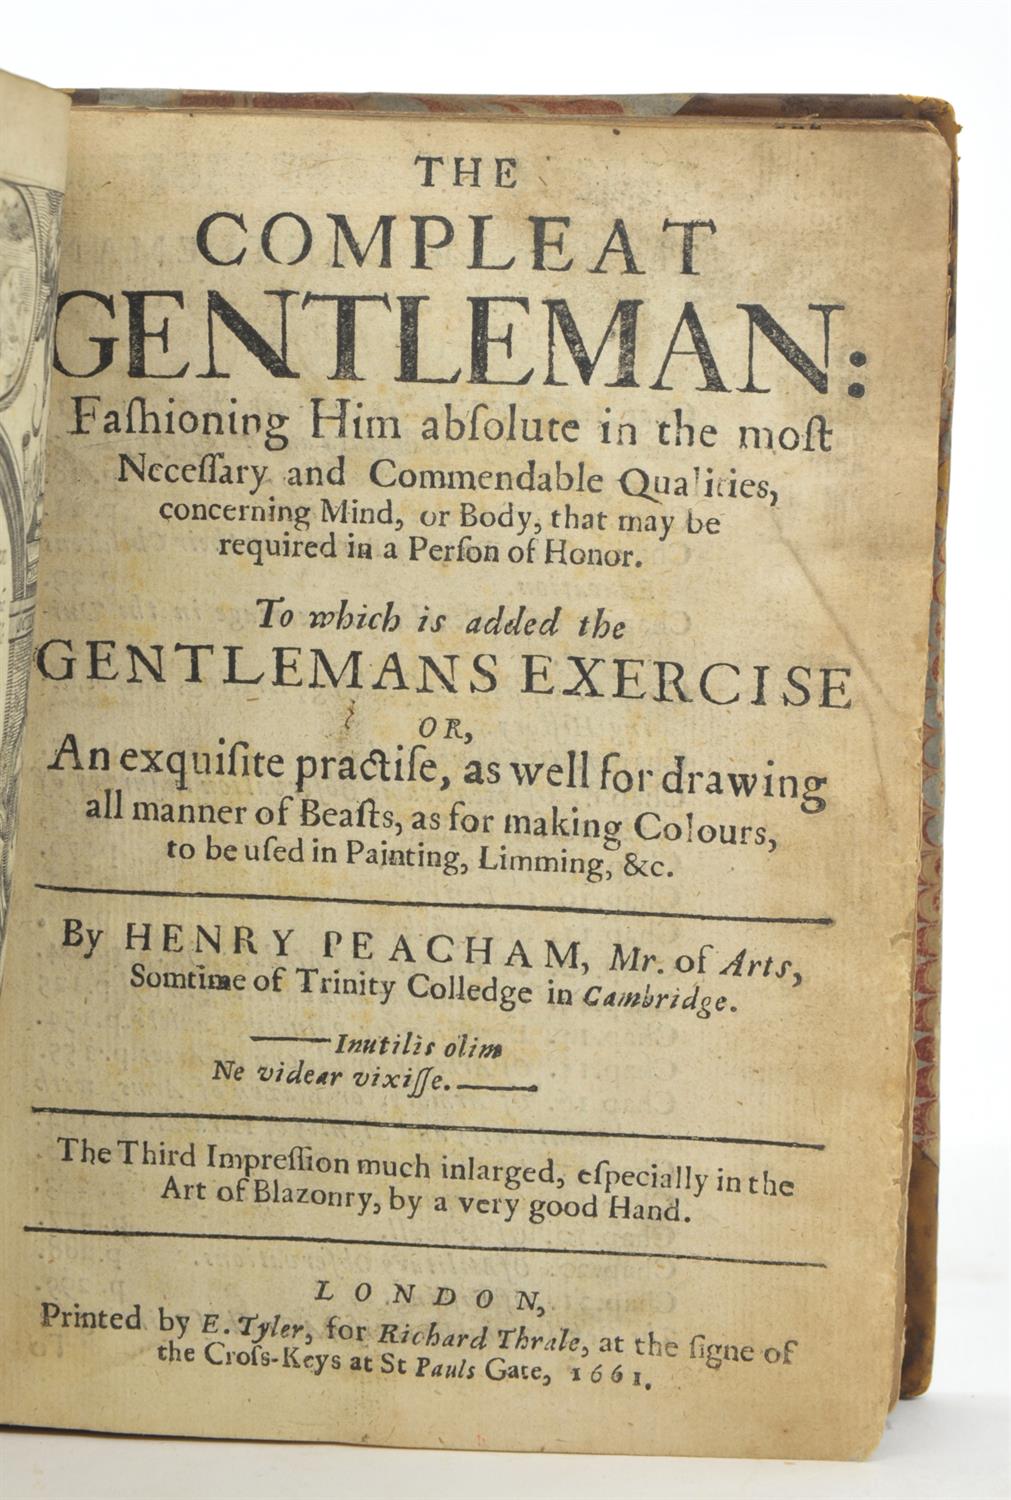 Henry Peacham, 'The Compleat Gentleman' (London: E. Tyler, 1661), 'the third impression, - Image 5 of 6